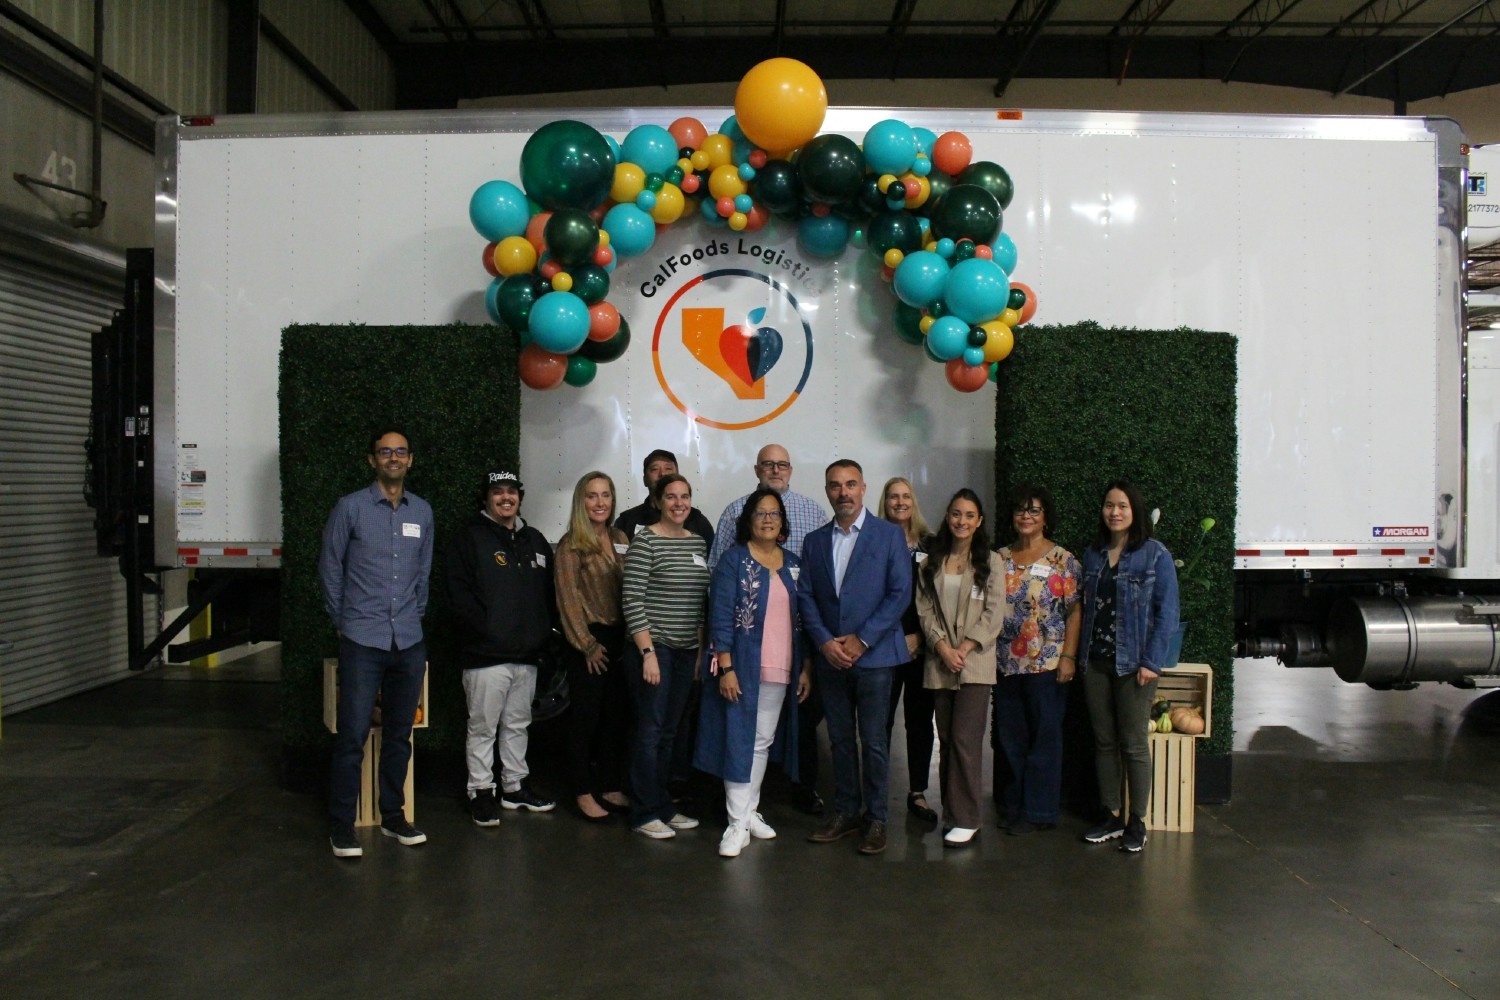 The CalFoods Logistics team at our anniversary party.